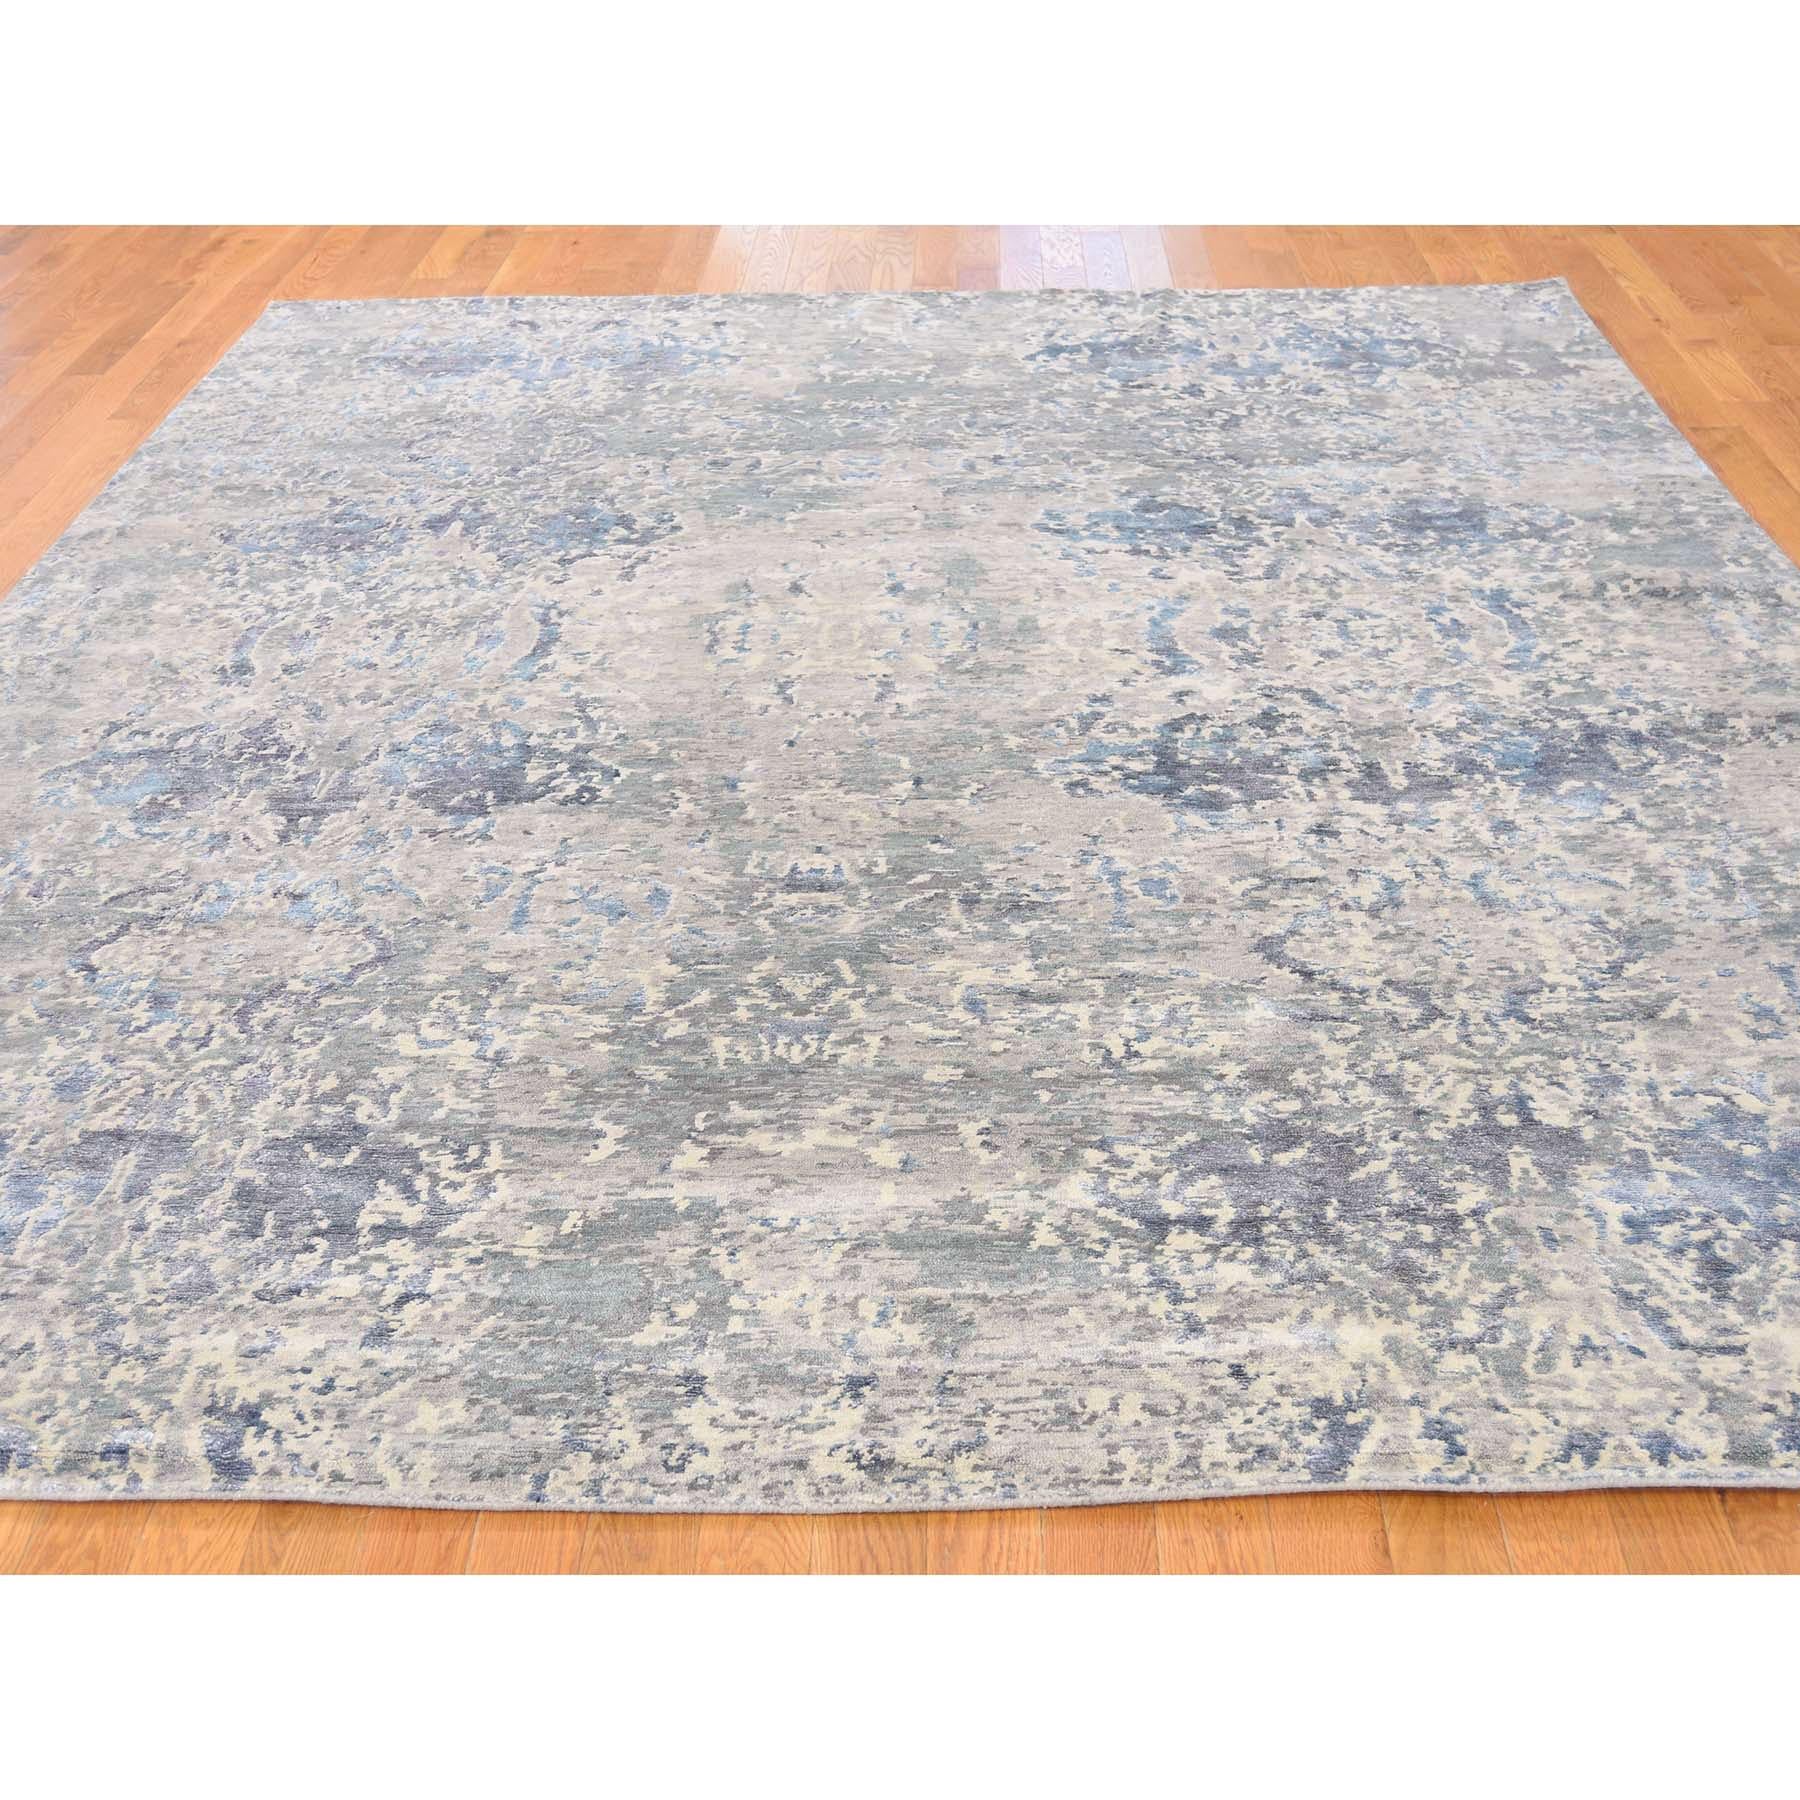 This is a truly genuine one-of-a-kind hand knotted wool and silk abstract design Oriental rug. It has been knotted for months and months in the centuries-old Persian weaving craftsmanship techniques by expert artisans. Measures: 8'1